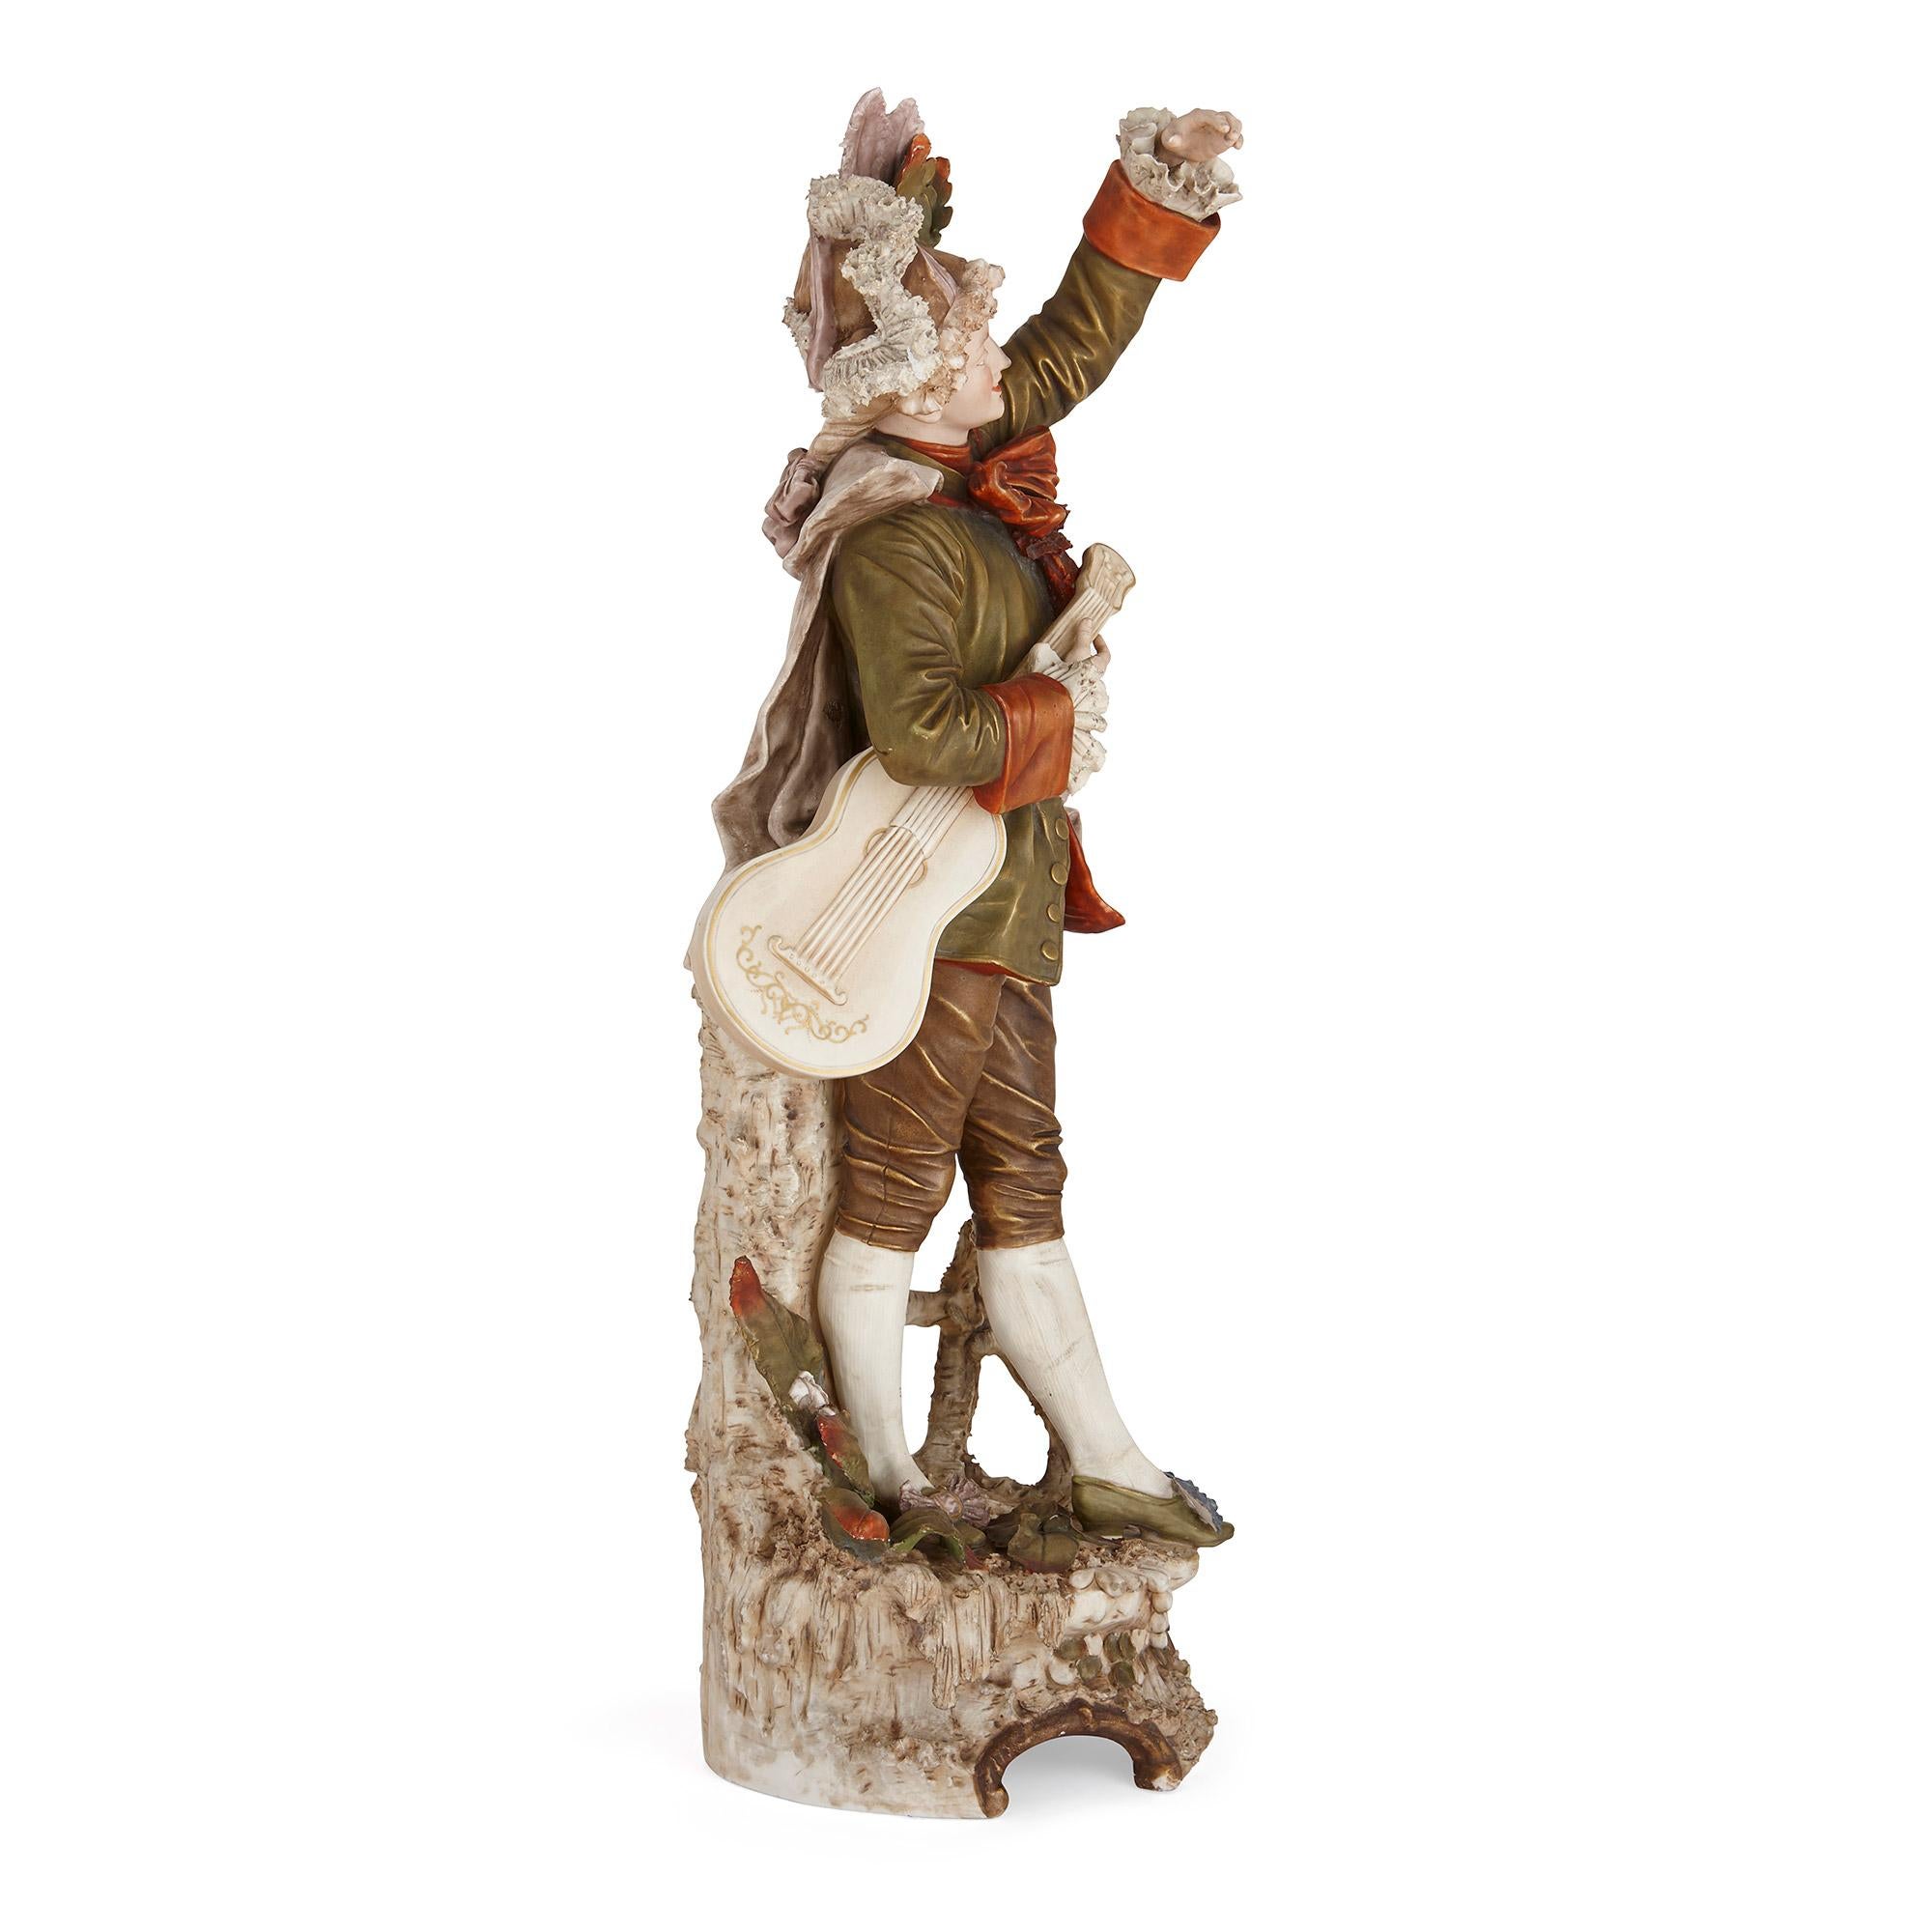 Bohemian Royal Dux porcelain figure of a musician
Bohemian, late 19th Century
Height 80cm, width 27cm, depth 27cm

This charming porcelain figure depicts a Rococo style musician. The figure is by Royal Dux, which traditionally crafted such